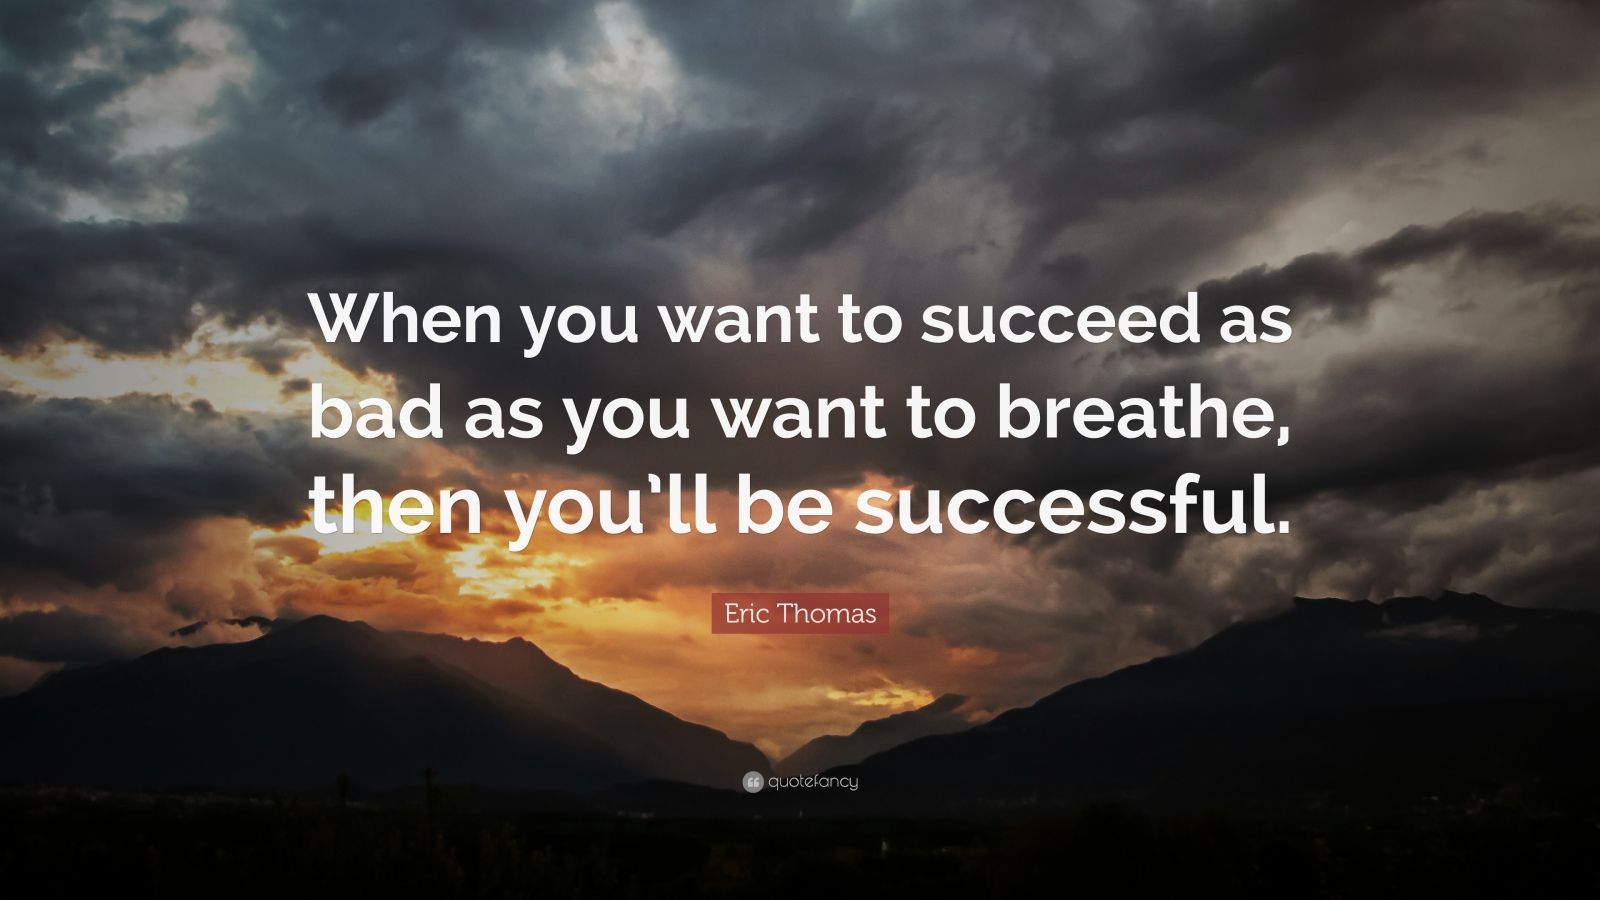 Eric Thomas Quote: “When you want to succeed as bad as you want to